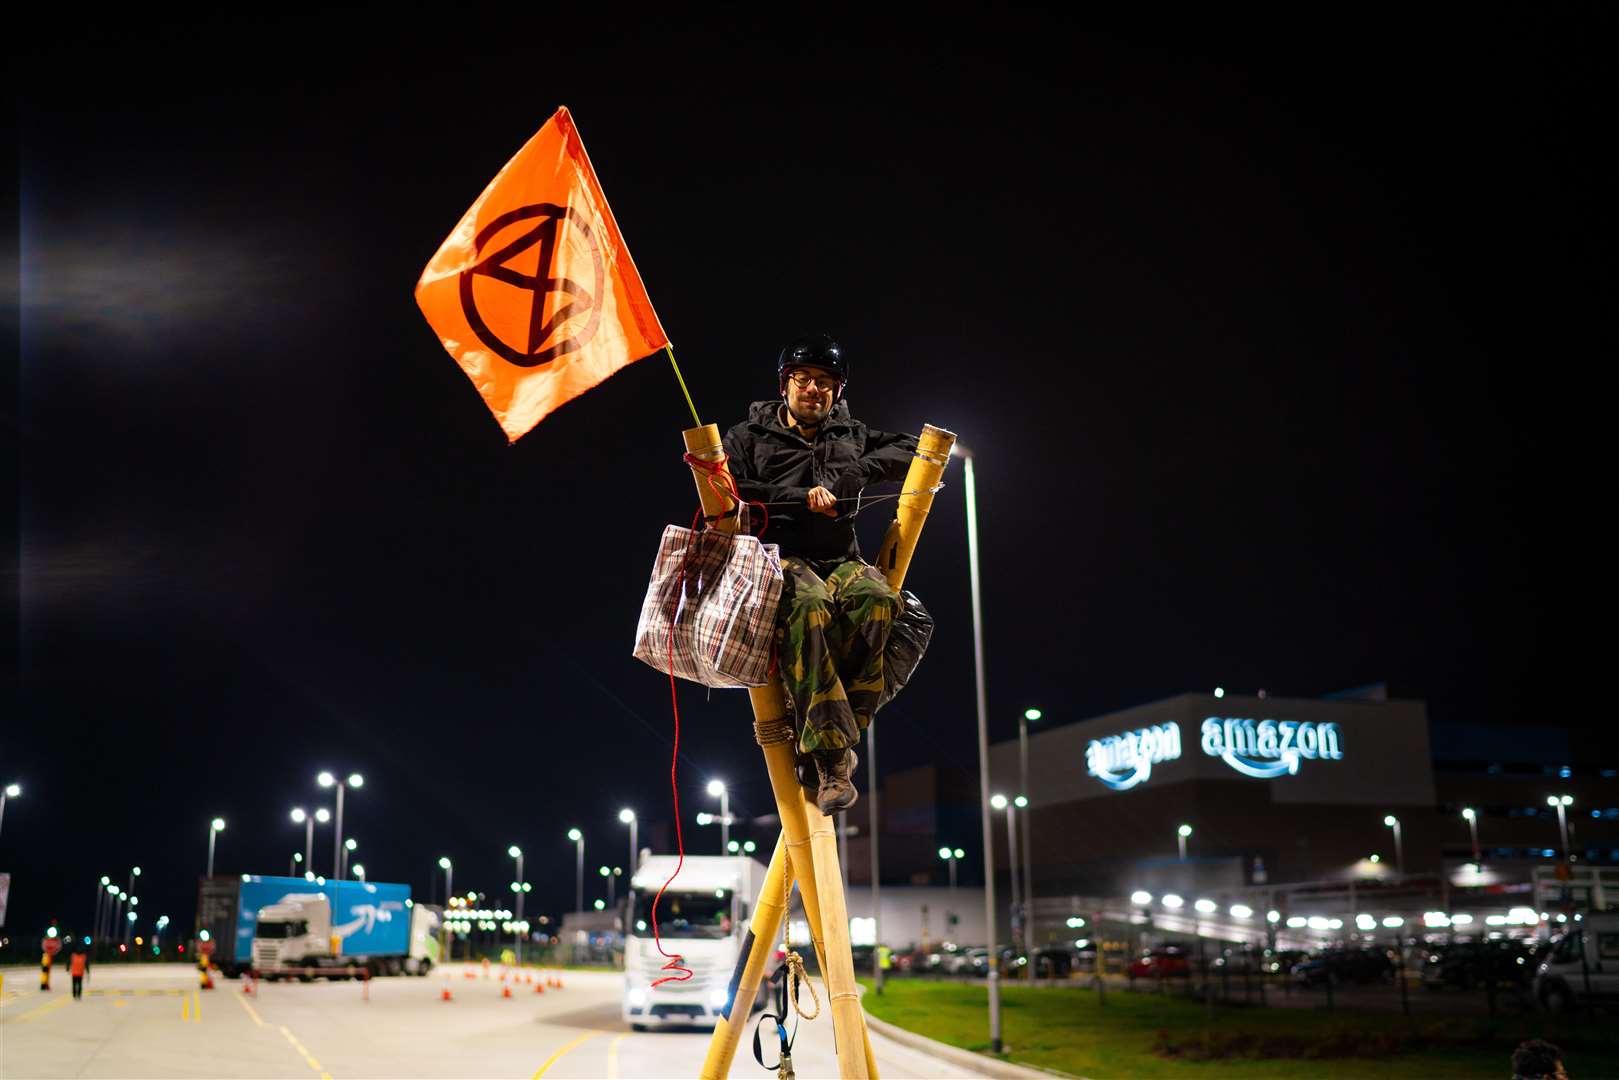 Extinction Rebellion protesters at the Amazon depot in Dartford. Picture: Yaz Ashmawi